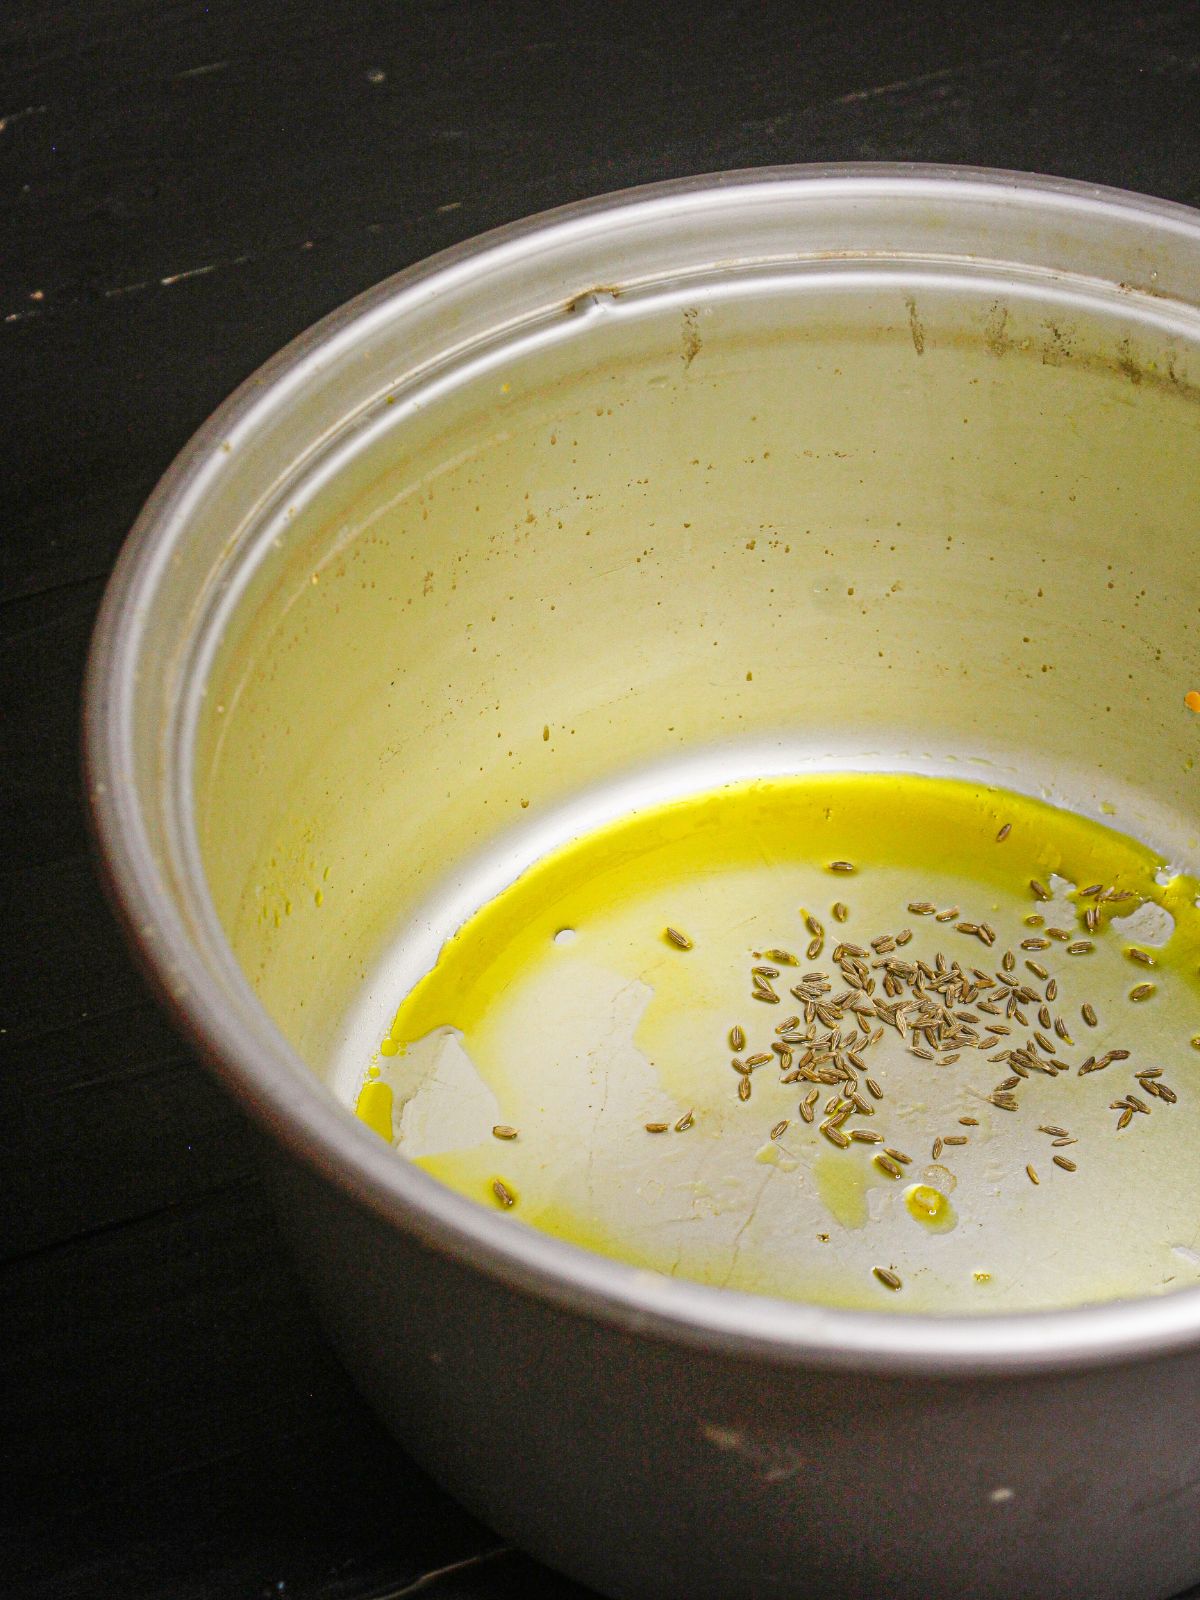 Add some cumin seeds to the pot